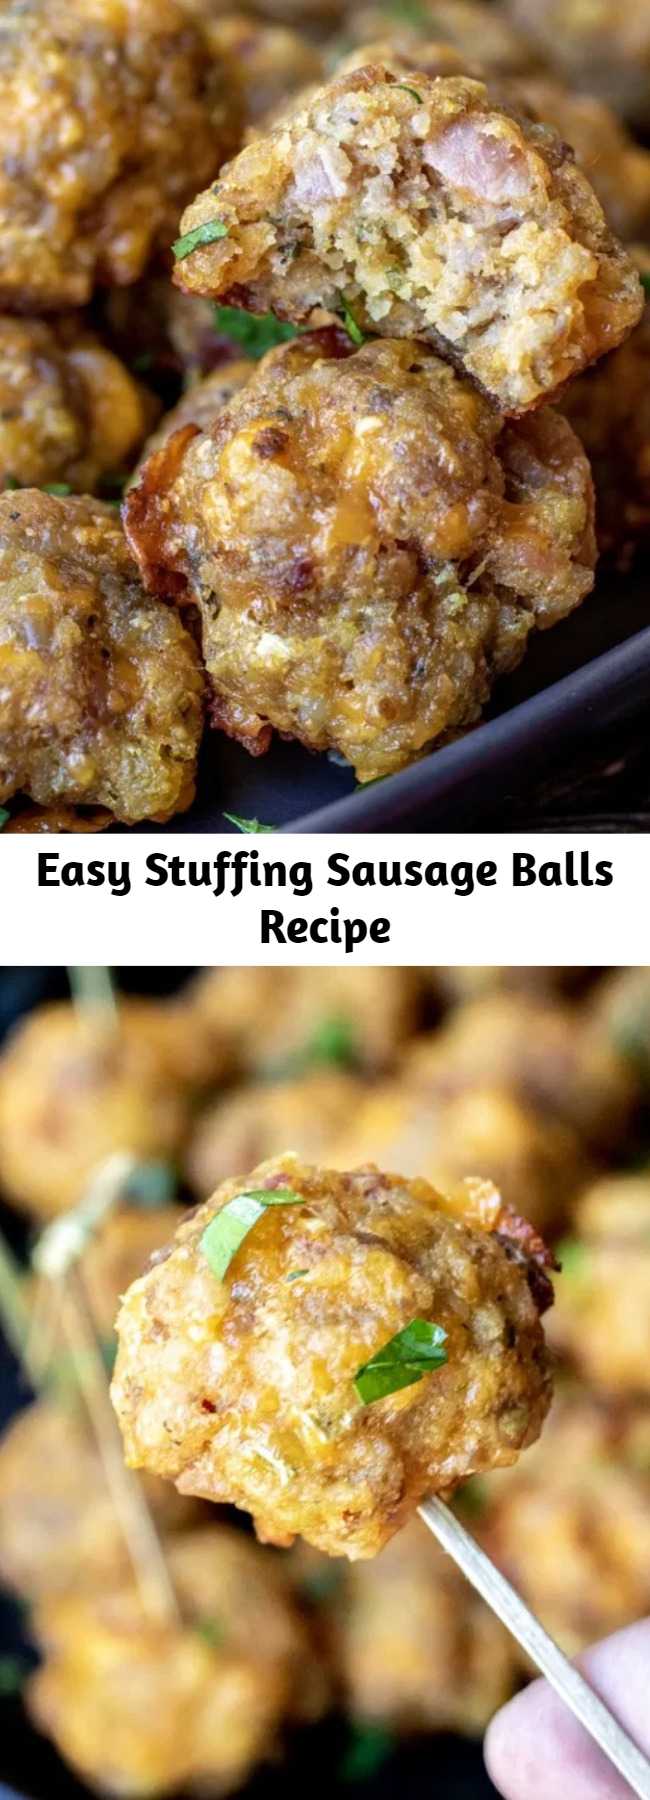 Easy Stuffing Sausage Balls Recipe - Stuffing Sausage Balls are an easy appetizer with all of the flavors of the holidays. Cheese, sausage, bacon, and stuffing are rolled together for one perfect bite! Perfect appetizer for Thanksgiving, Christmas, or New Year's Eve! #thanksgiving #appetizer #Christmas #Newyearseve #partyfood #sausage